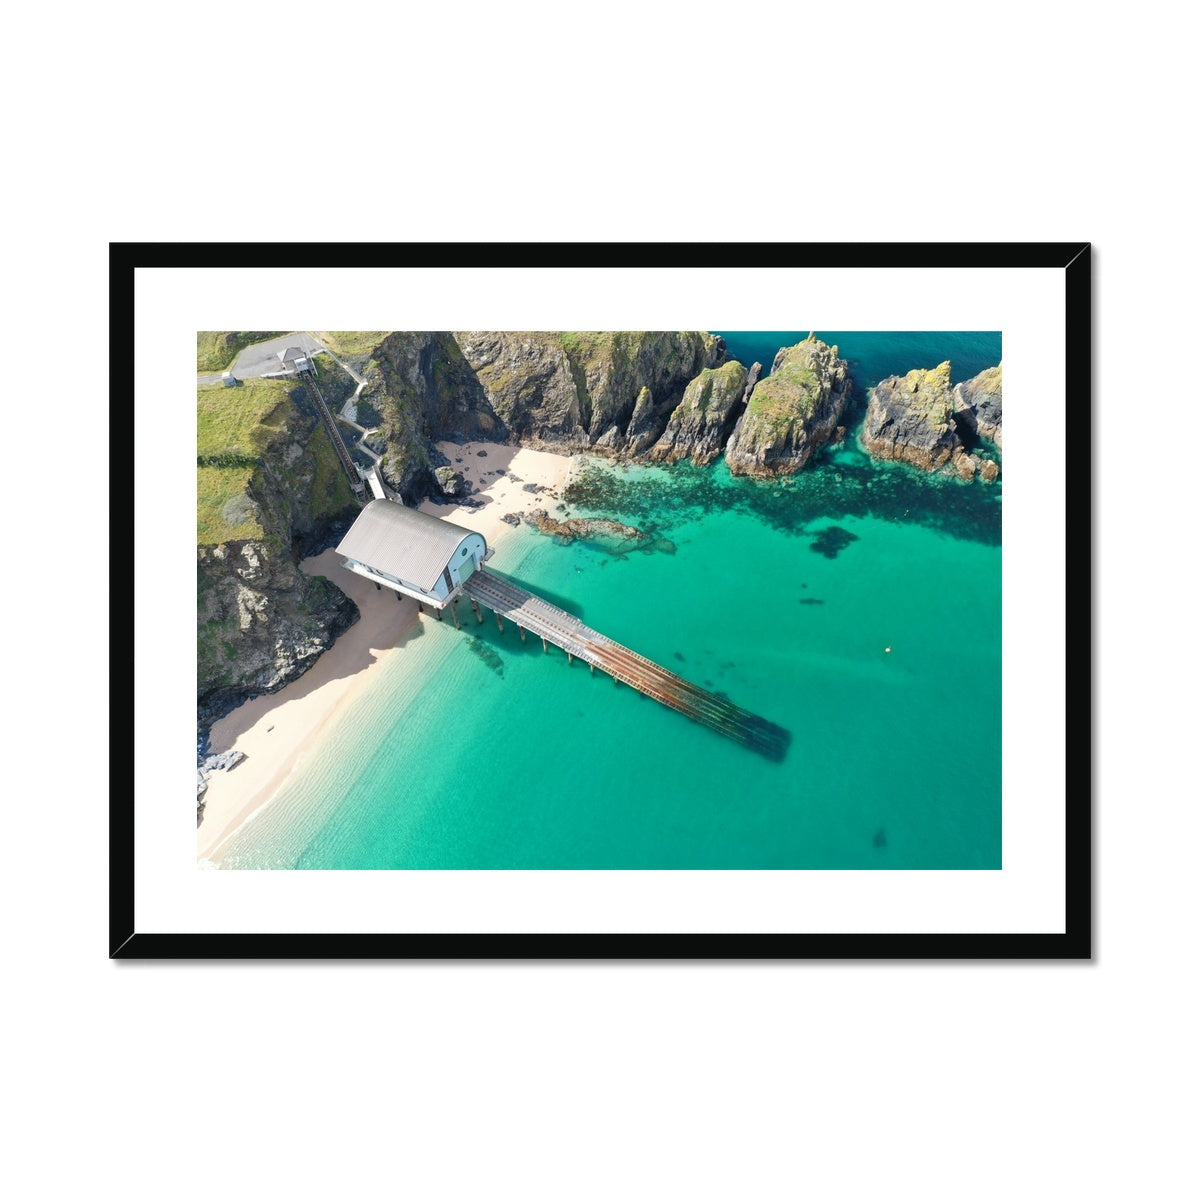 padstow lifeboat station framed print